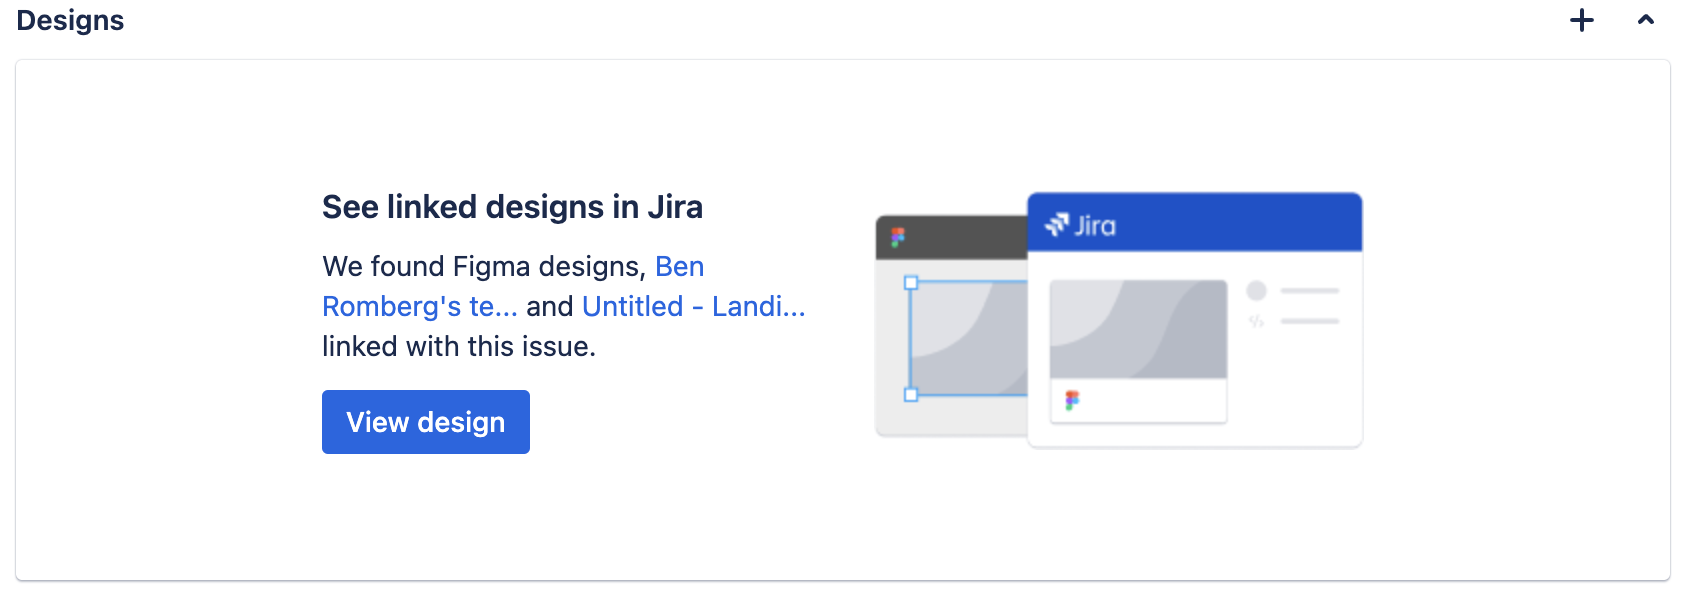 Designs view of Figma for Jira within an issue